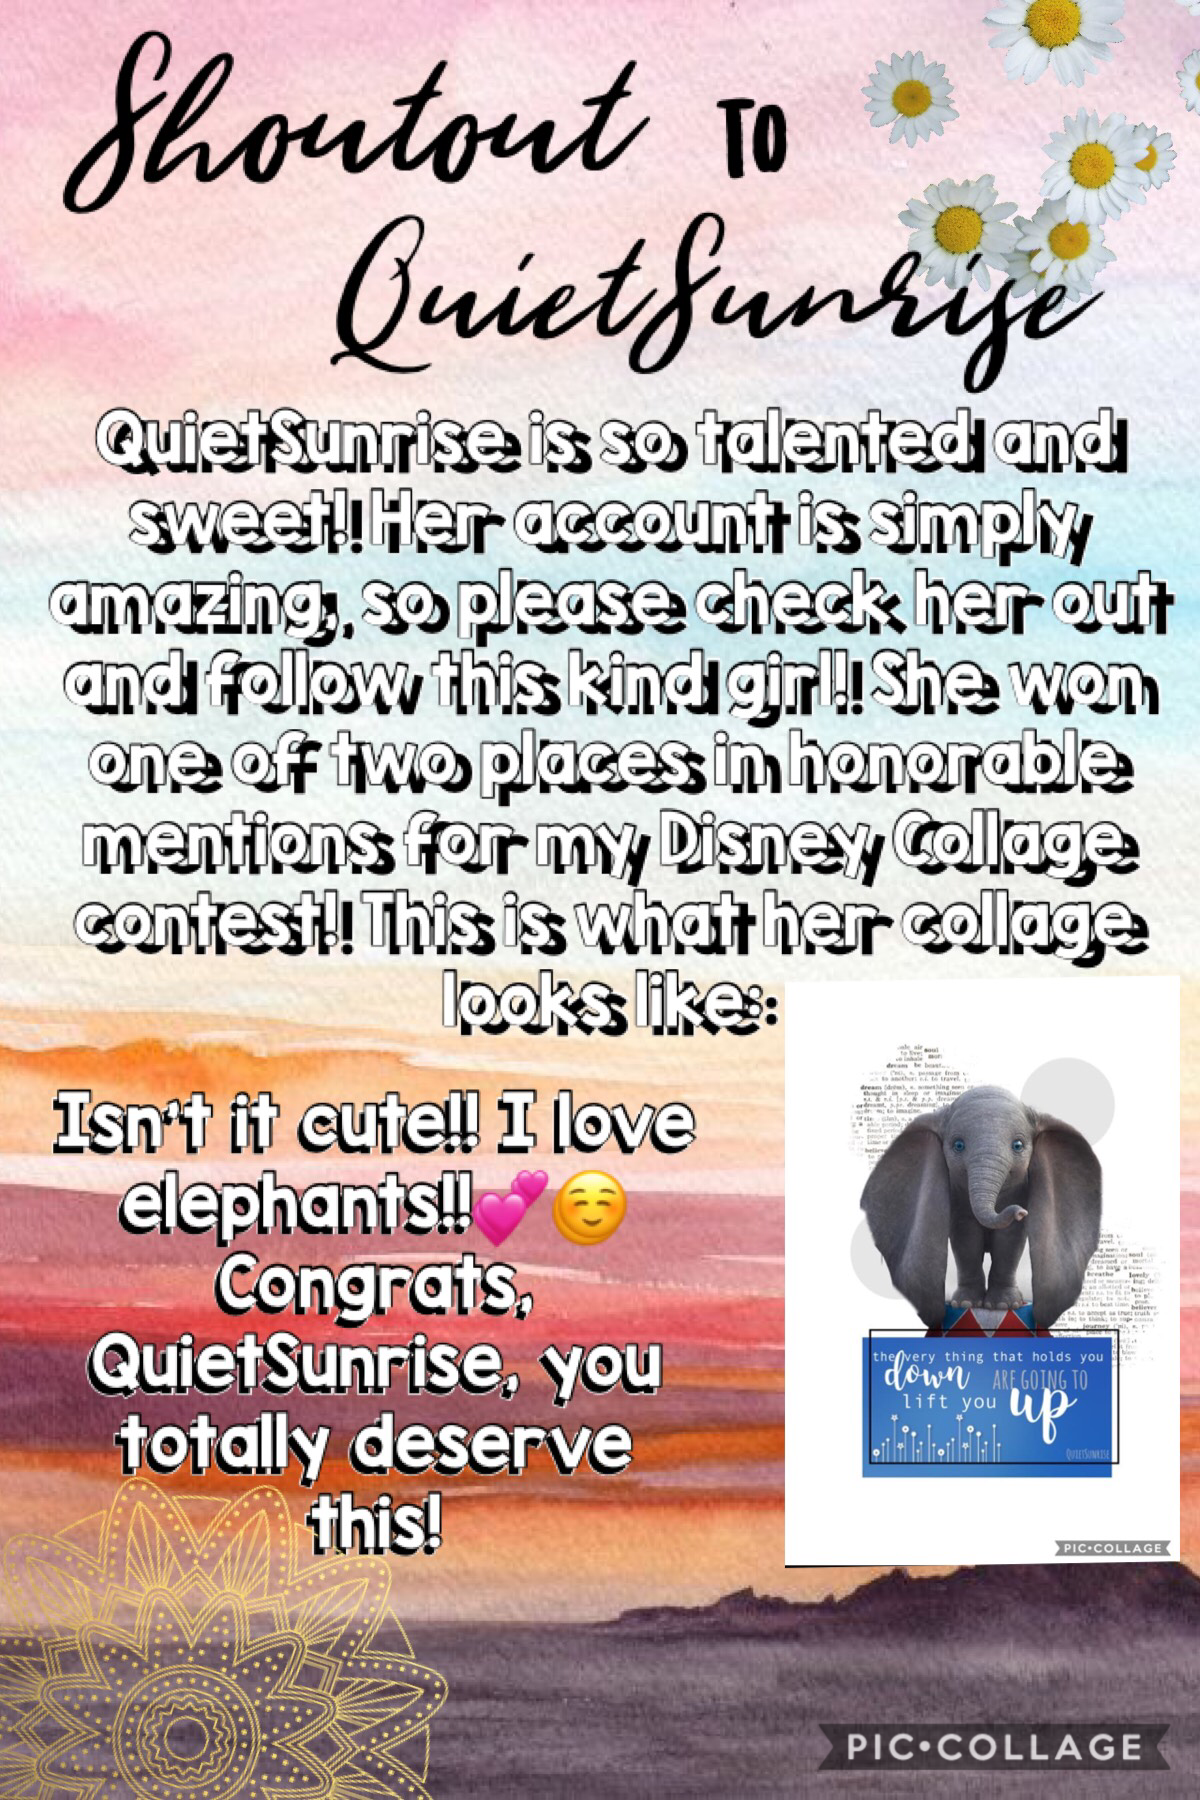 Shoutout to QuietSunrise! 👍🏼💕 her account is super cute! Congrats for winning honorable mention in my contest!!